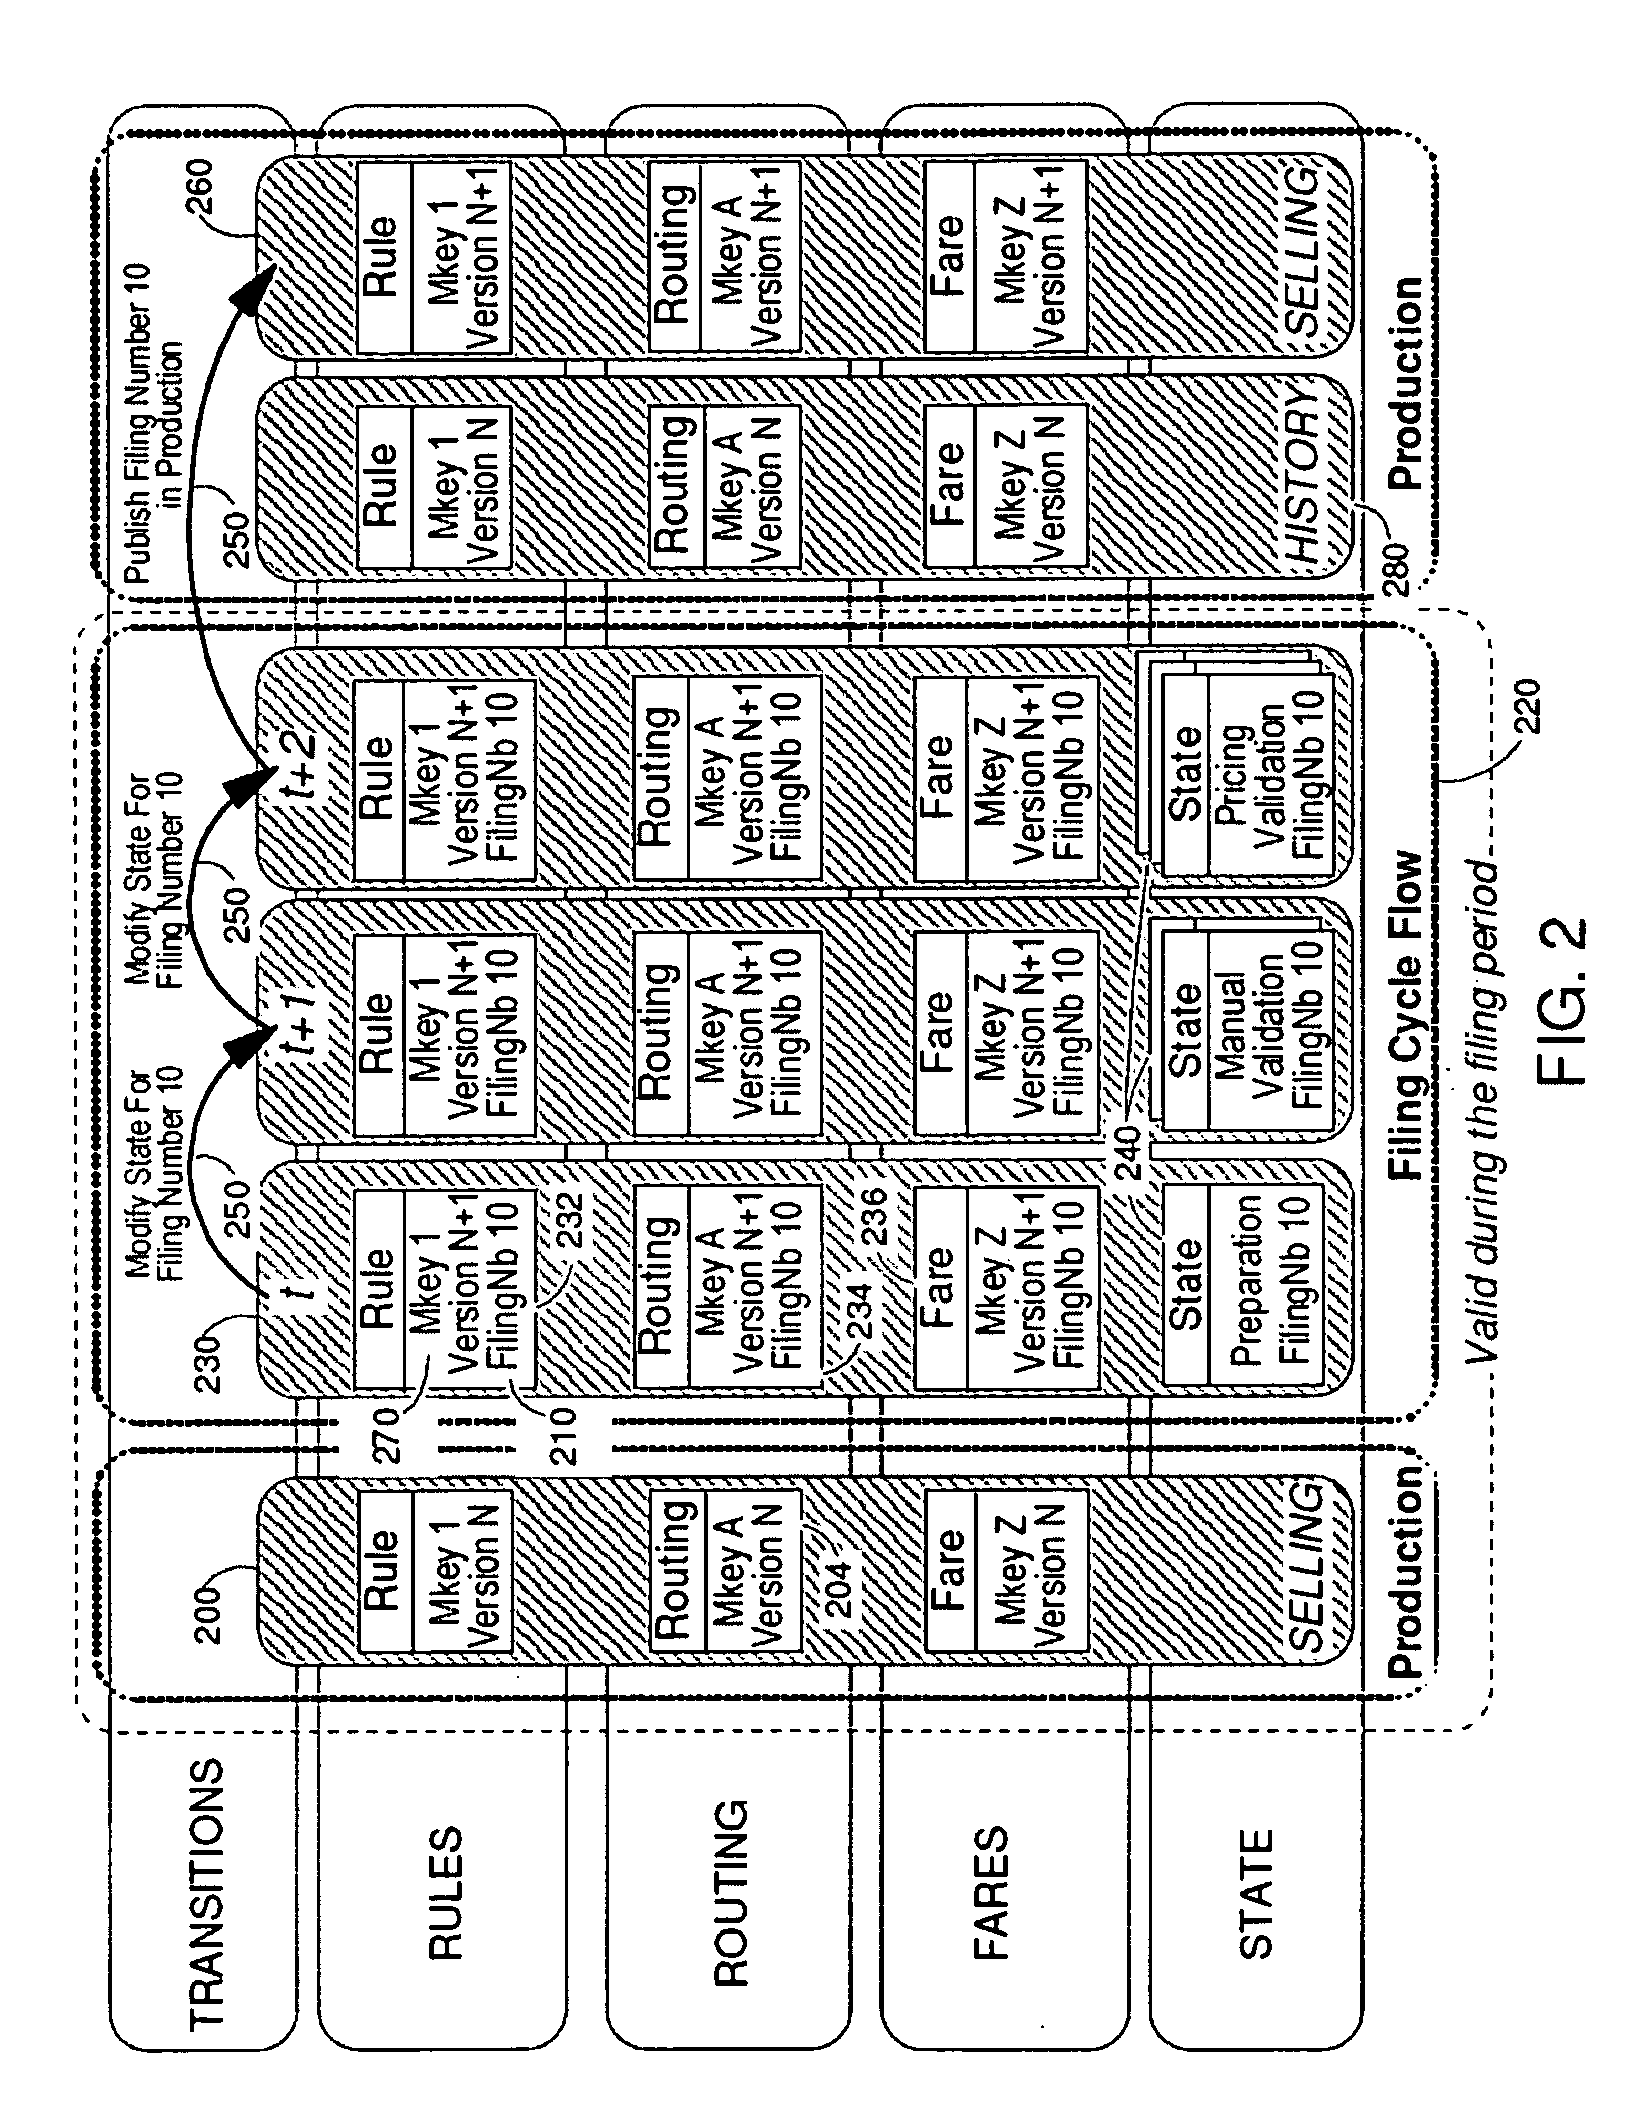 Method allowing validation in a production database of new entered data prior to their release